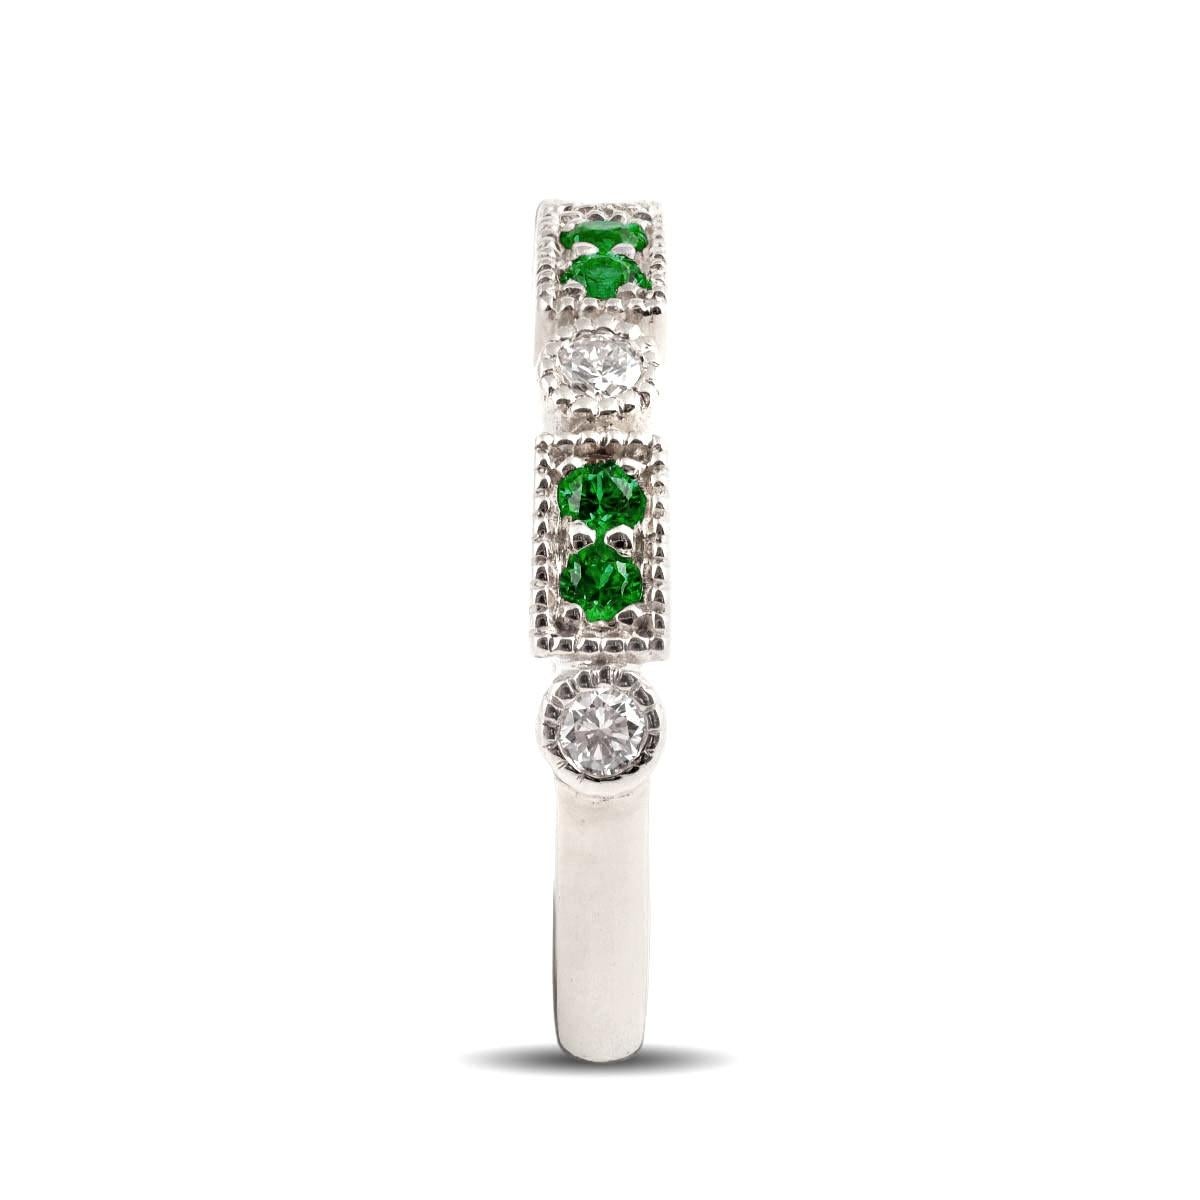 Mixed Cut 0.20 Carats Tsavorite Garnets Diamonds set in 14K White Gold Stackable Ring For Sale